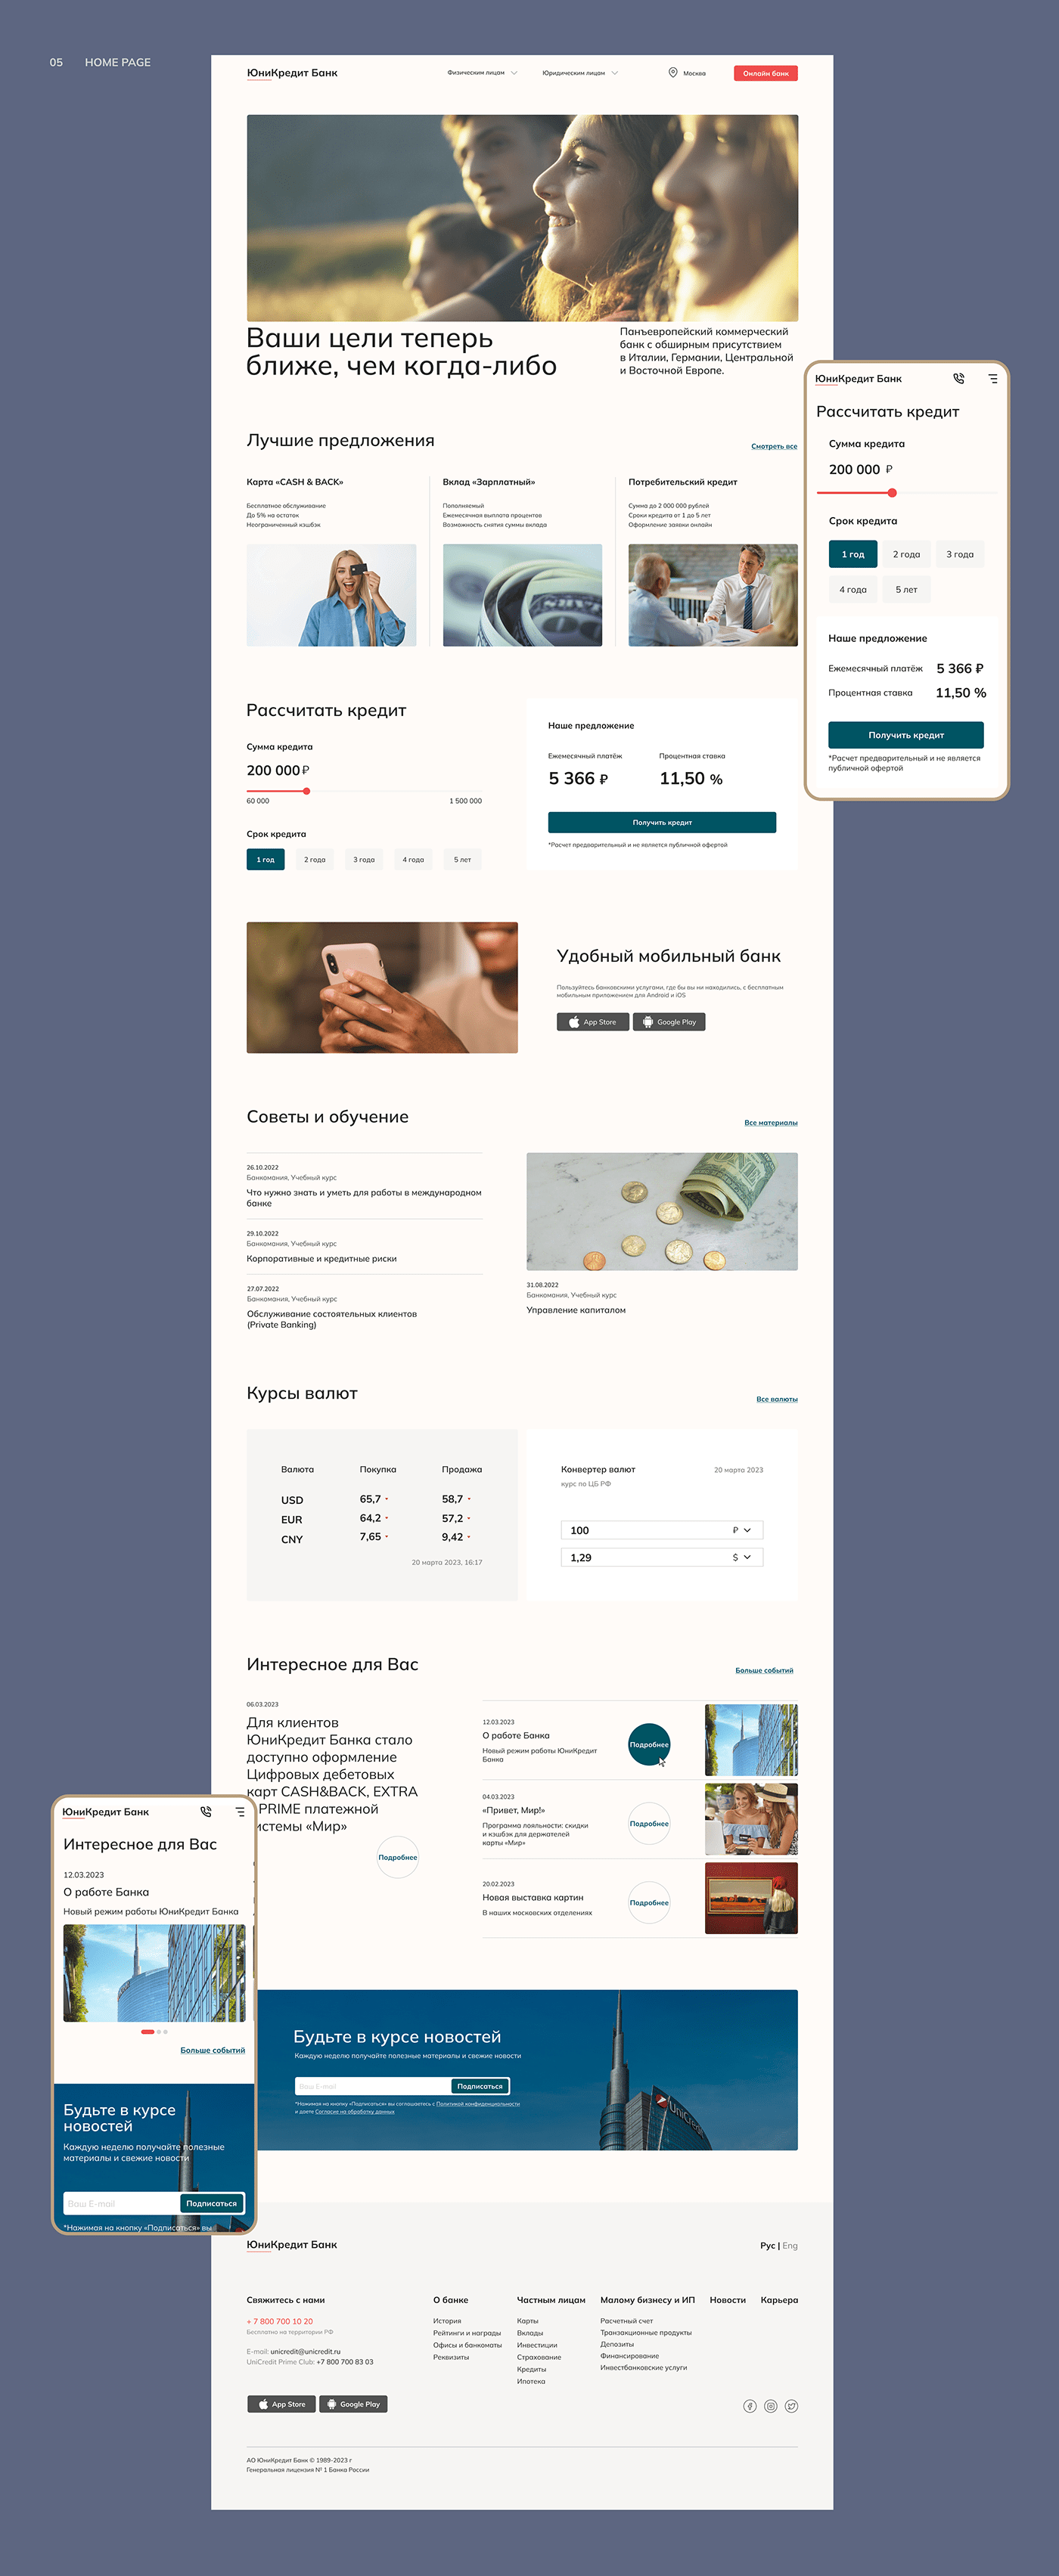 Bank business company corporate credit card finance money UI/UX user interface